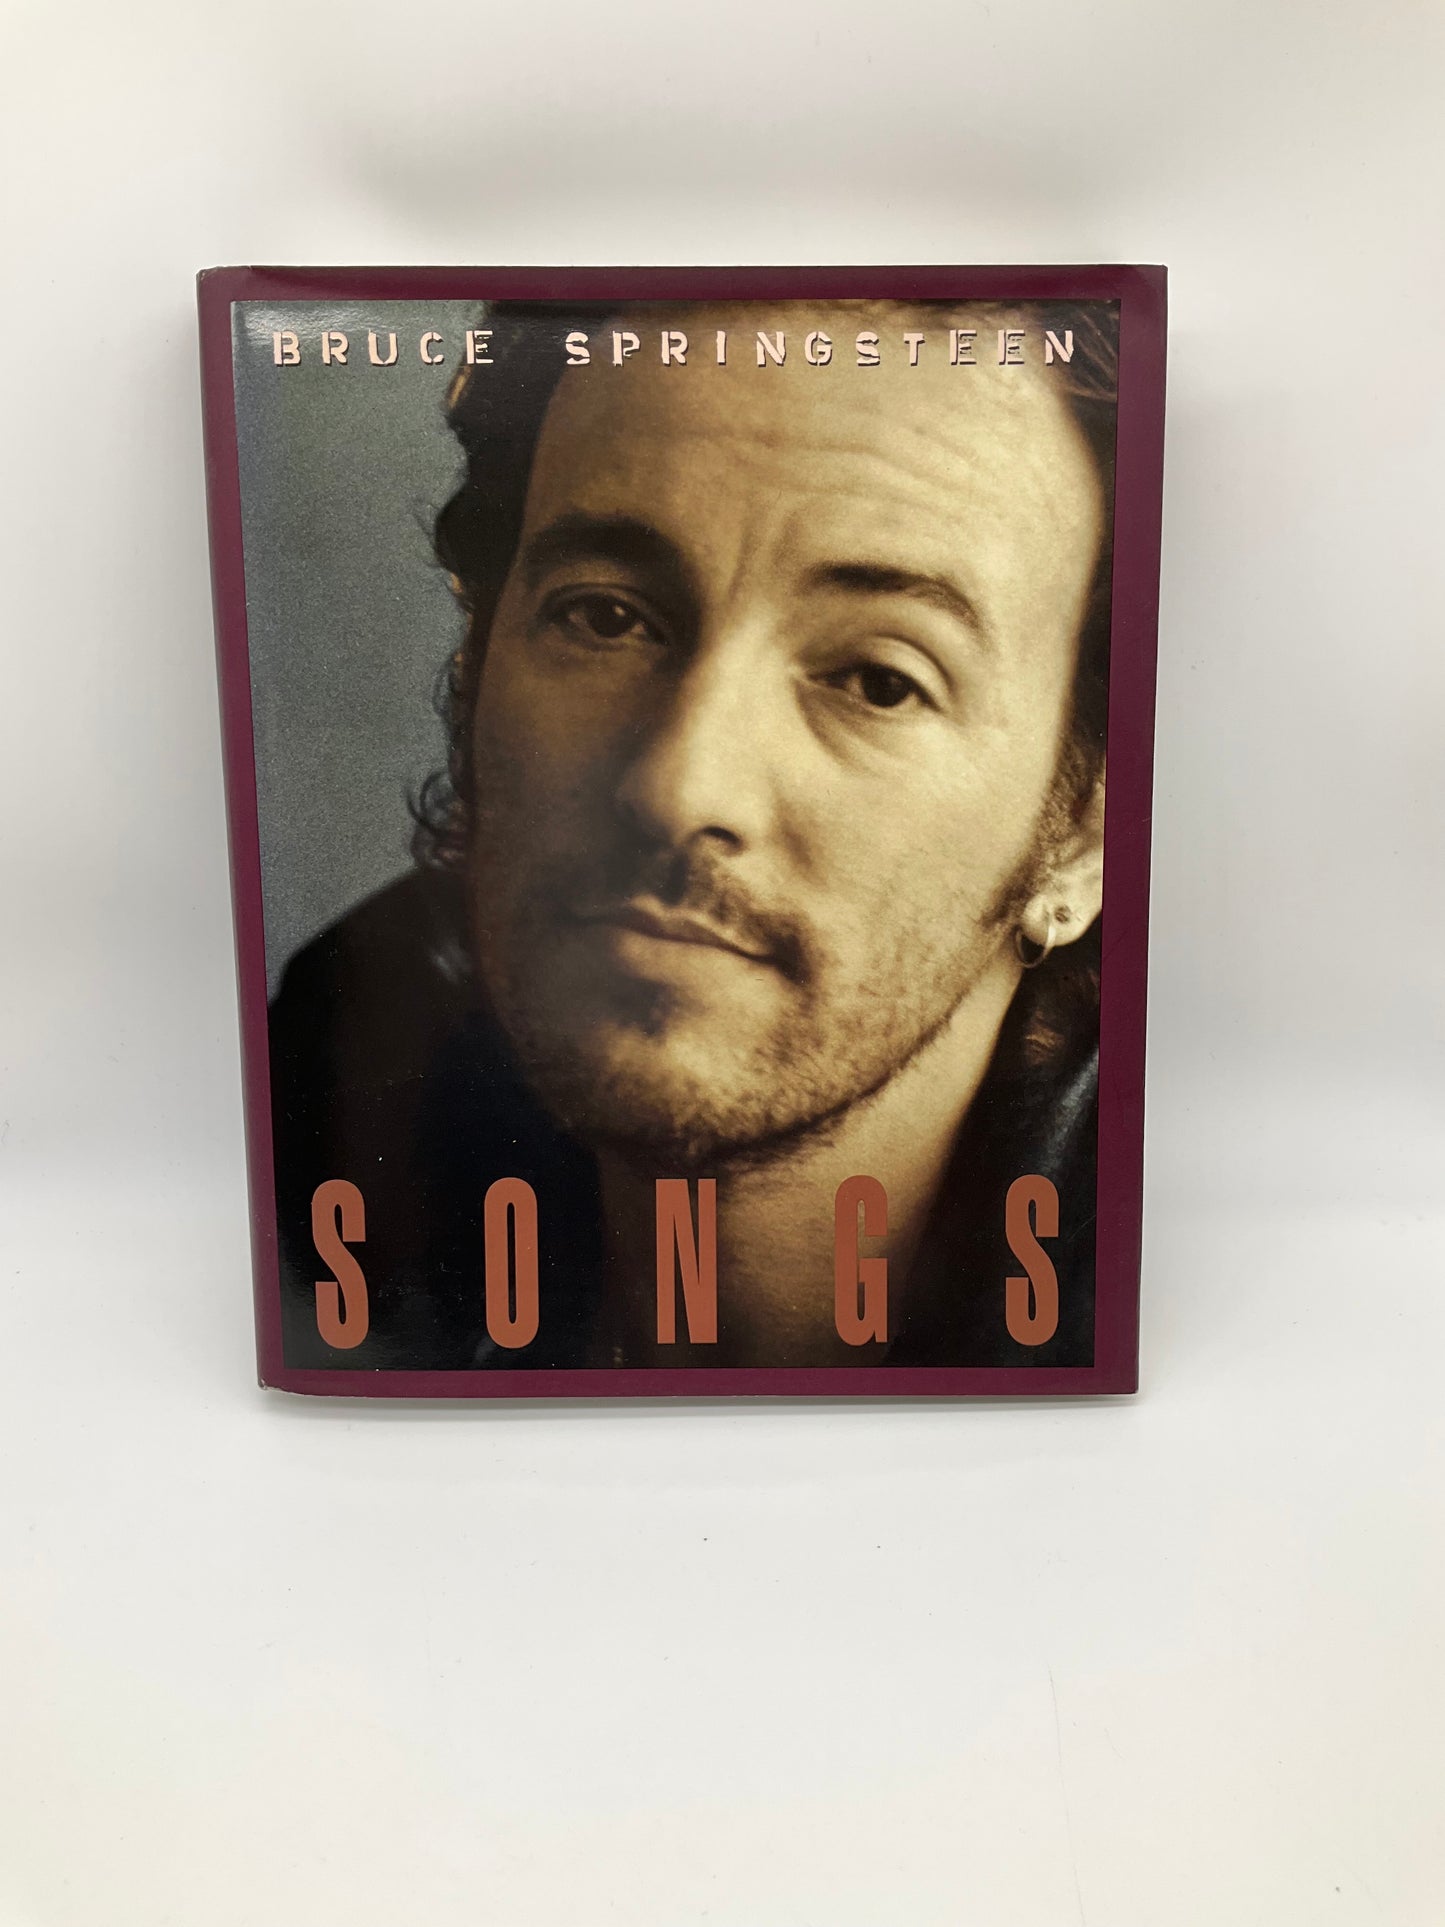 Bruce Springsteen "Songs" 1st Edition